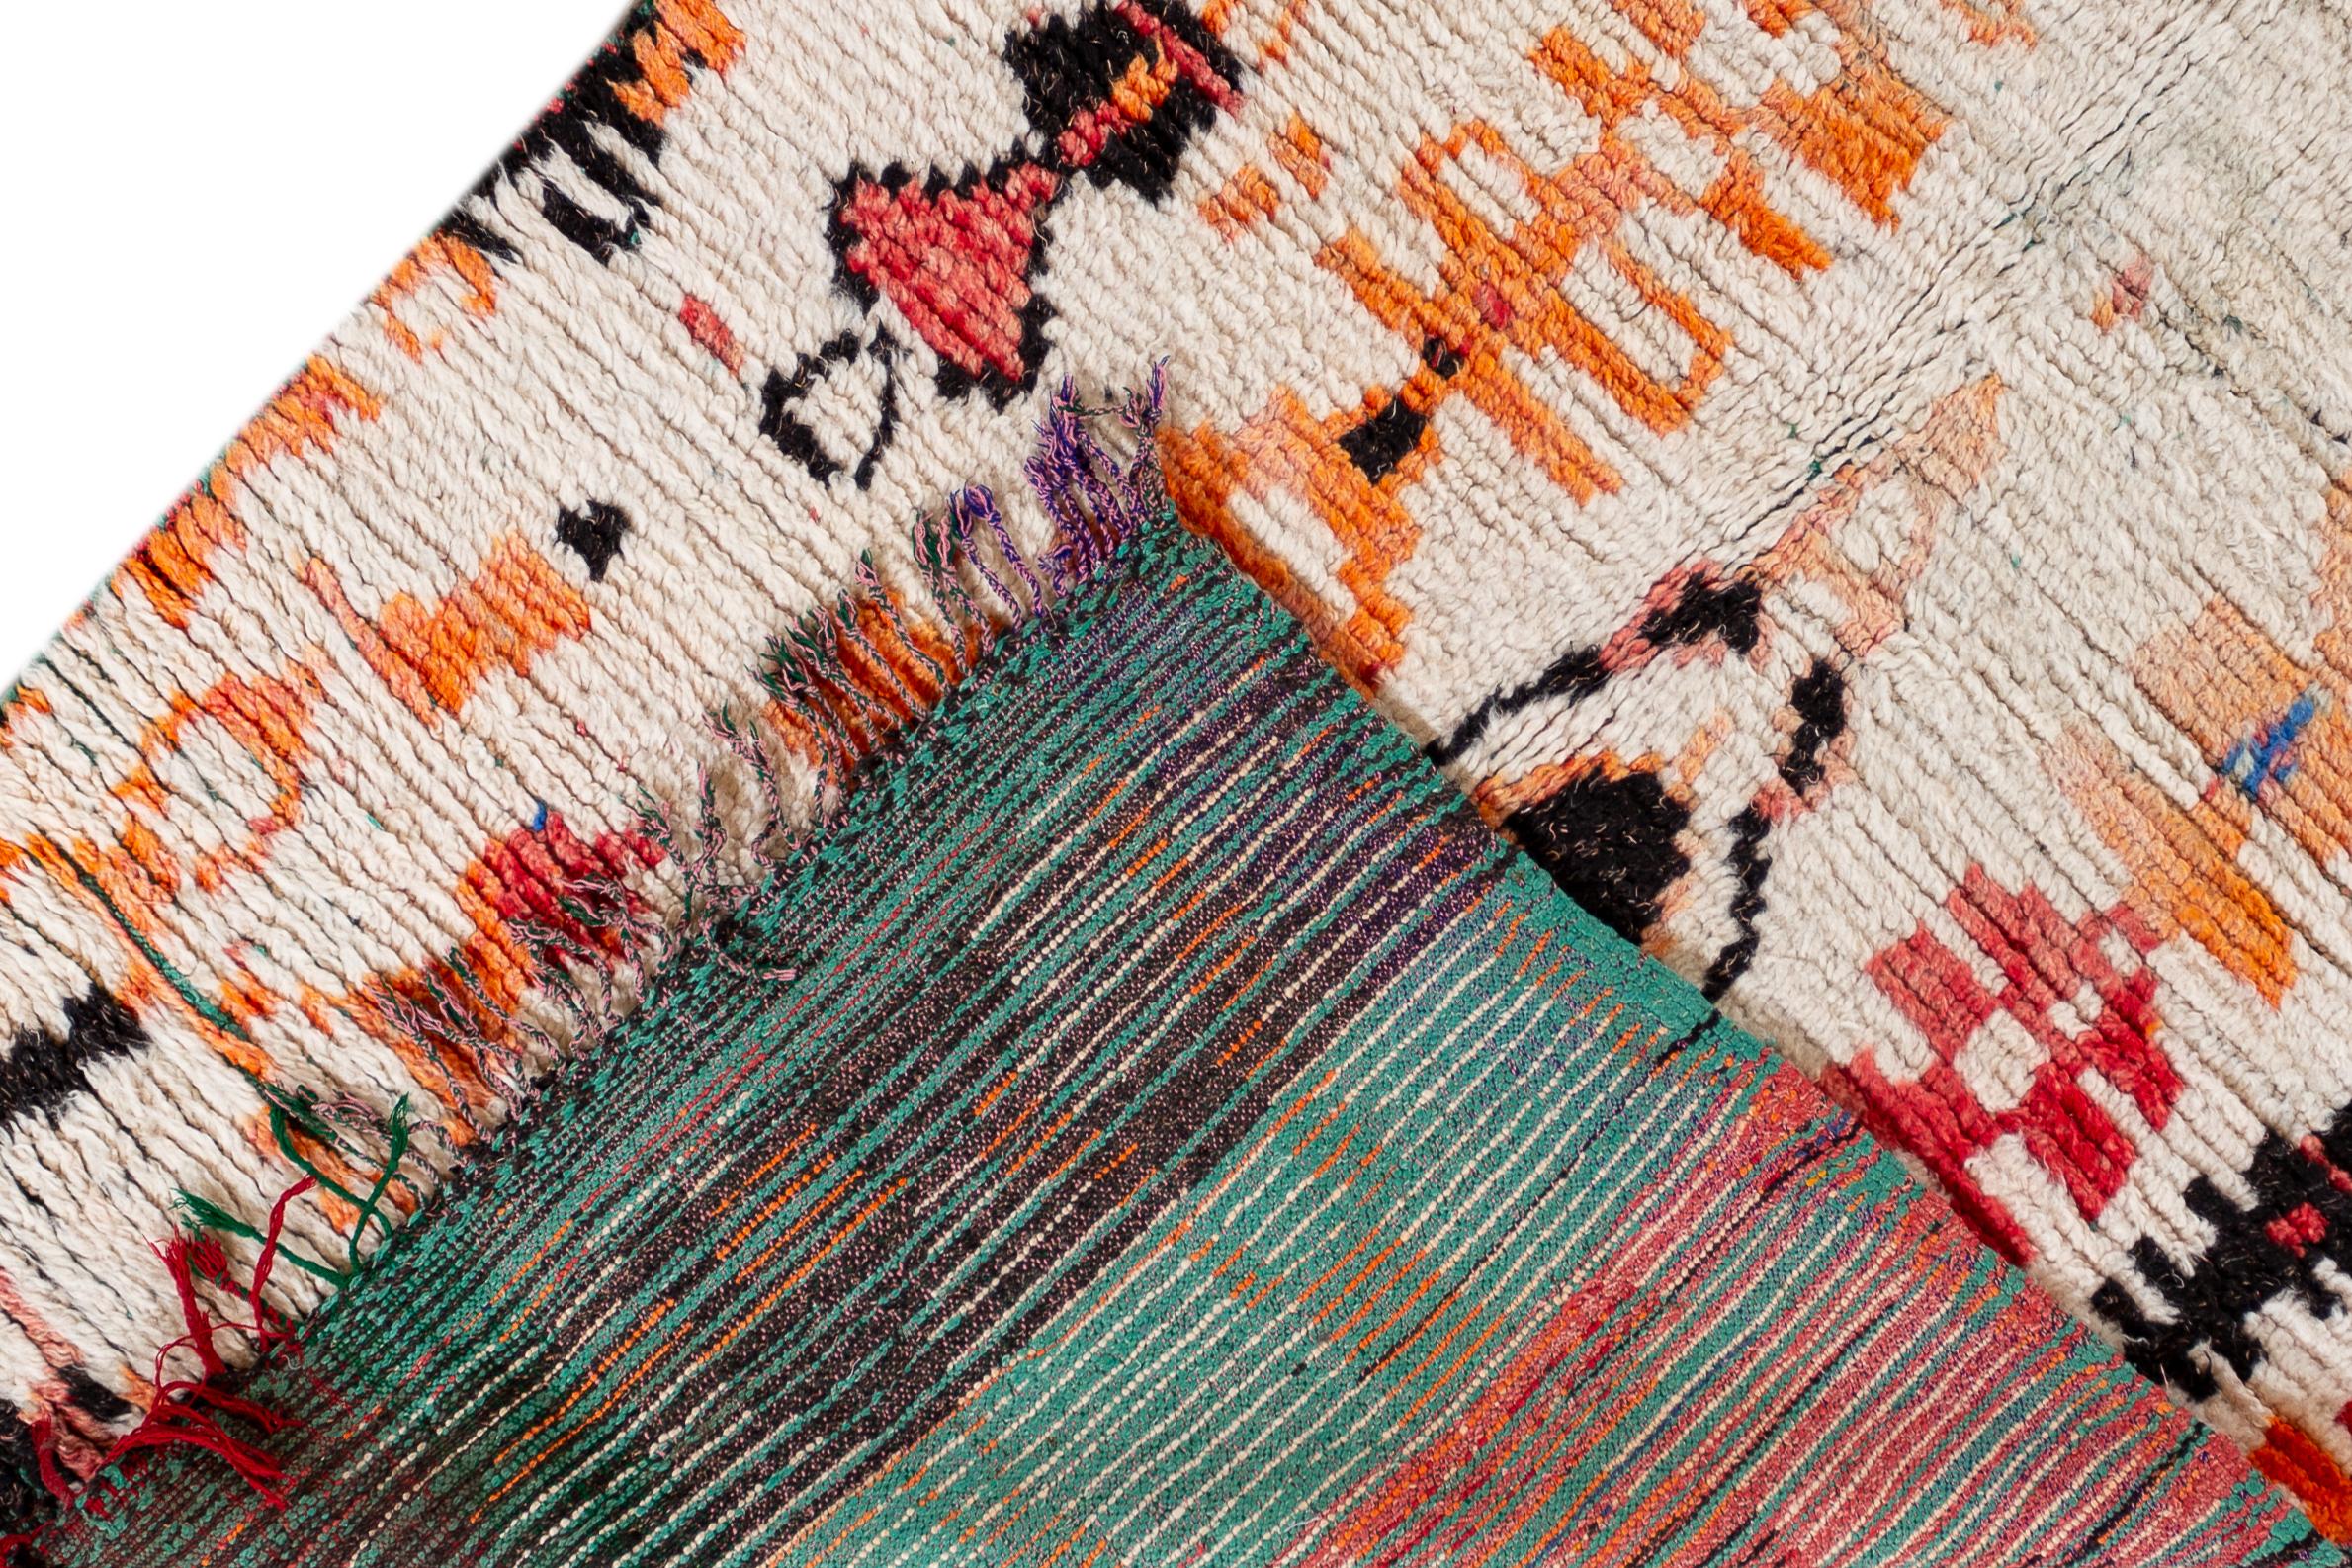 A vintage Moroccan rug with an ivory field and a vibrantly-colored tribal design of orange, red, blue and yellow. This hand knotted wool scatter rug measures 4'6